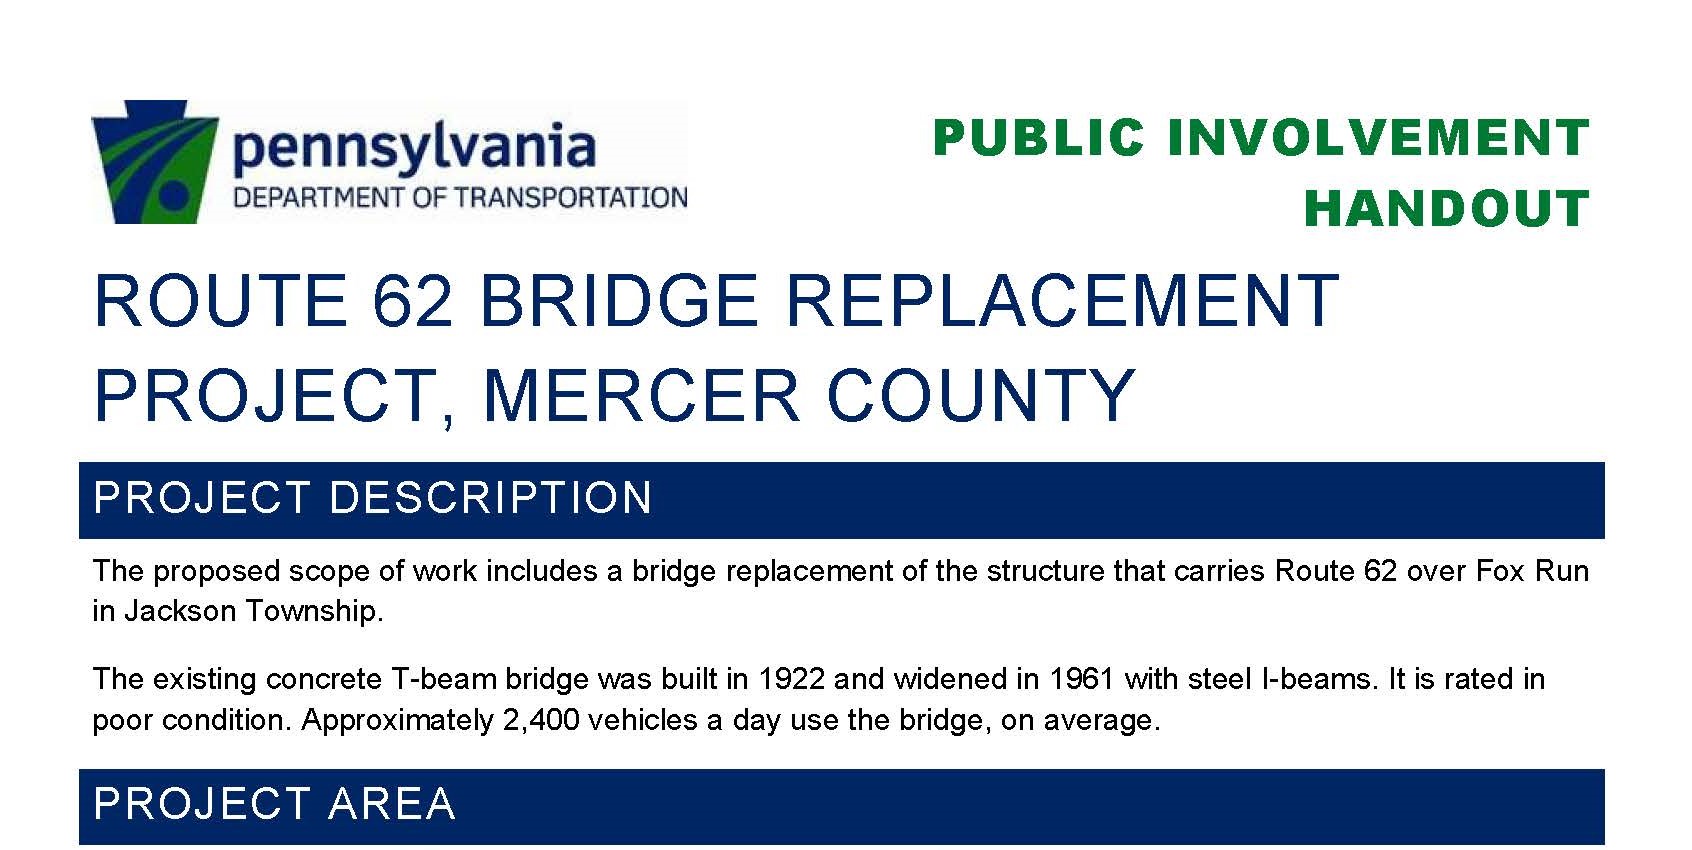 This handout offers information on the replacement of a Route 62 bridge in Mercer County.